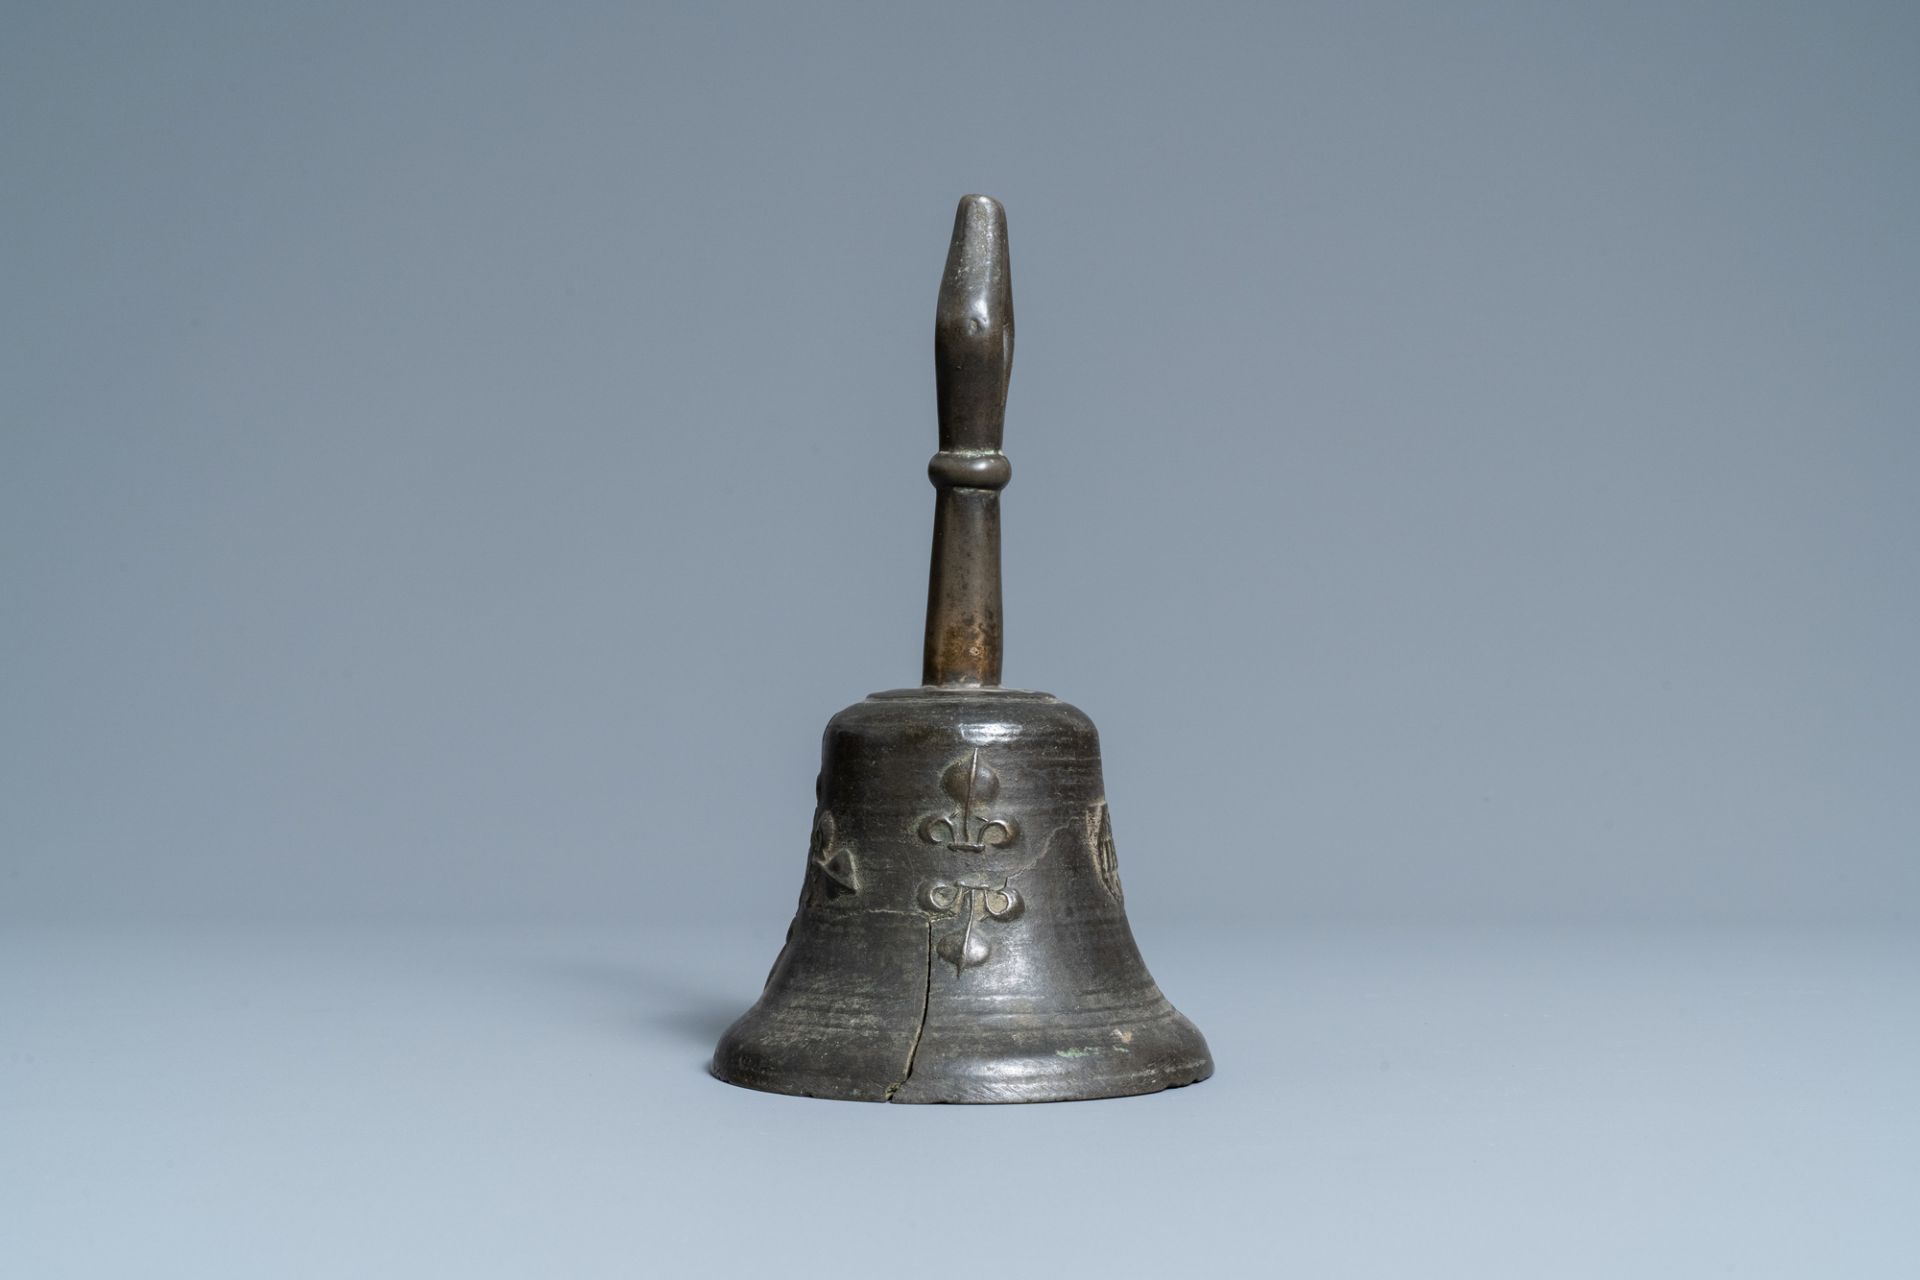 A bronze bell with applied fleur-de-lis and an IHS medallion, France, 16th C. - Image 5 of 7